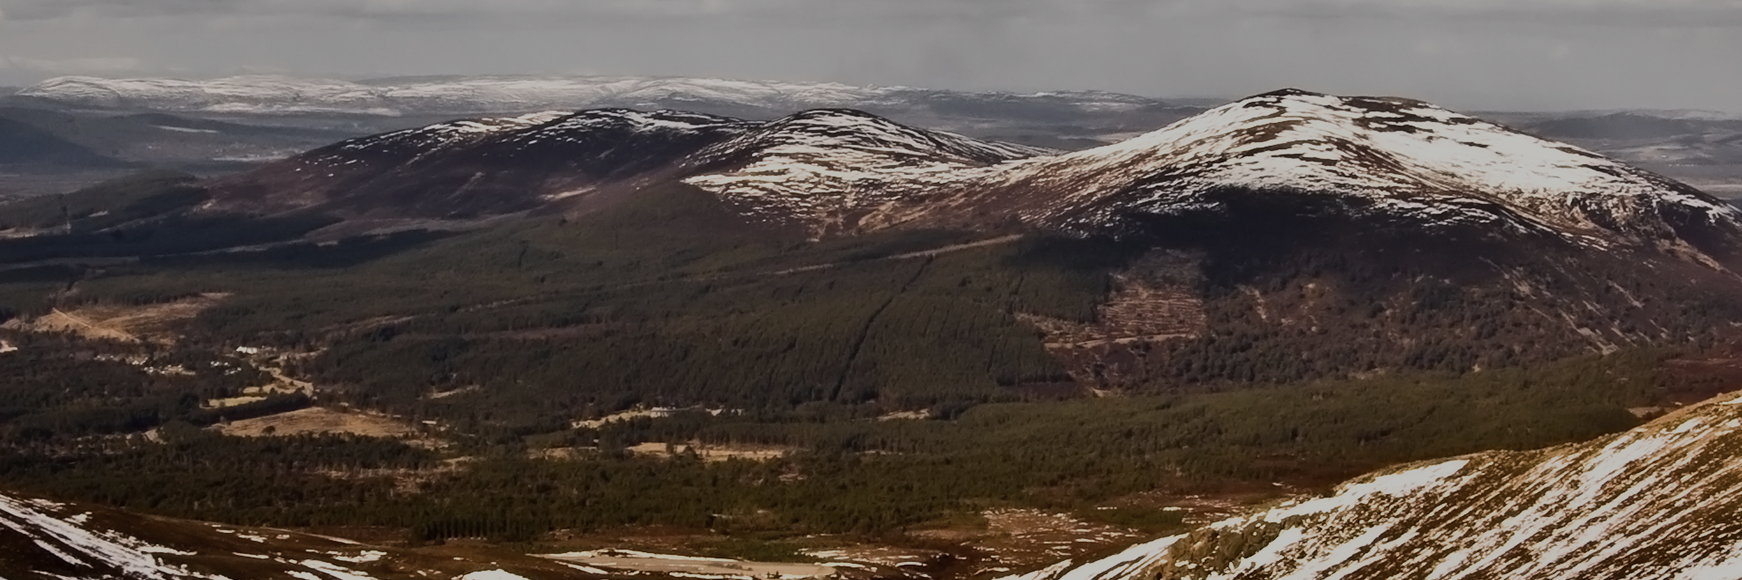 Skiing in the Cairngorms banner image